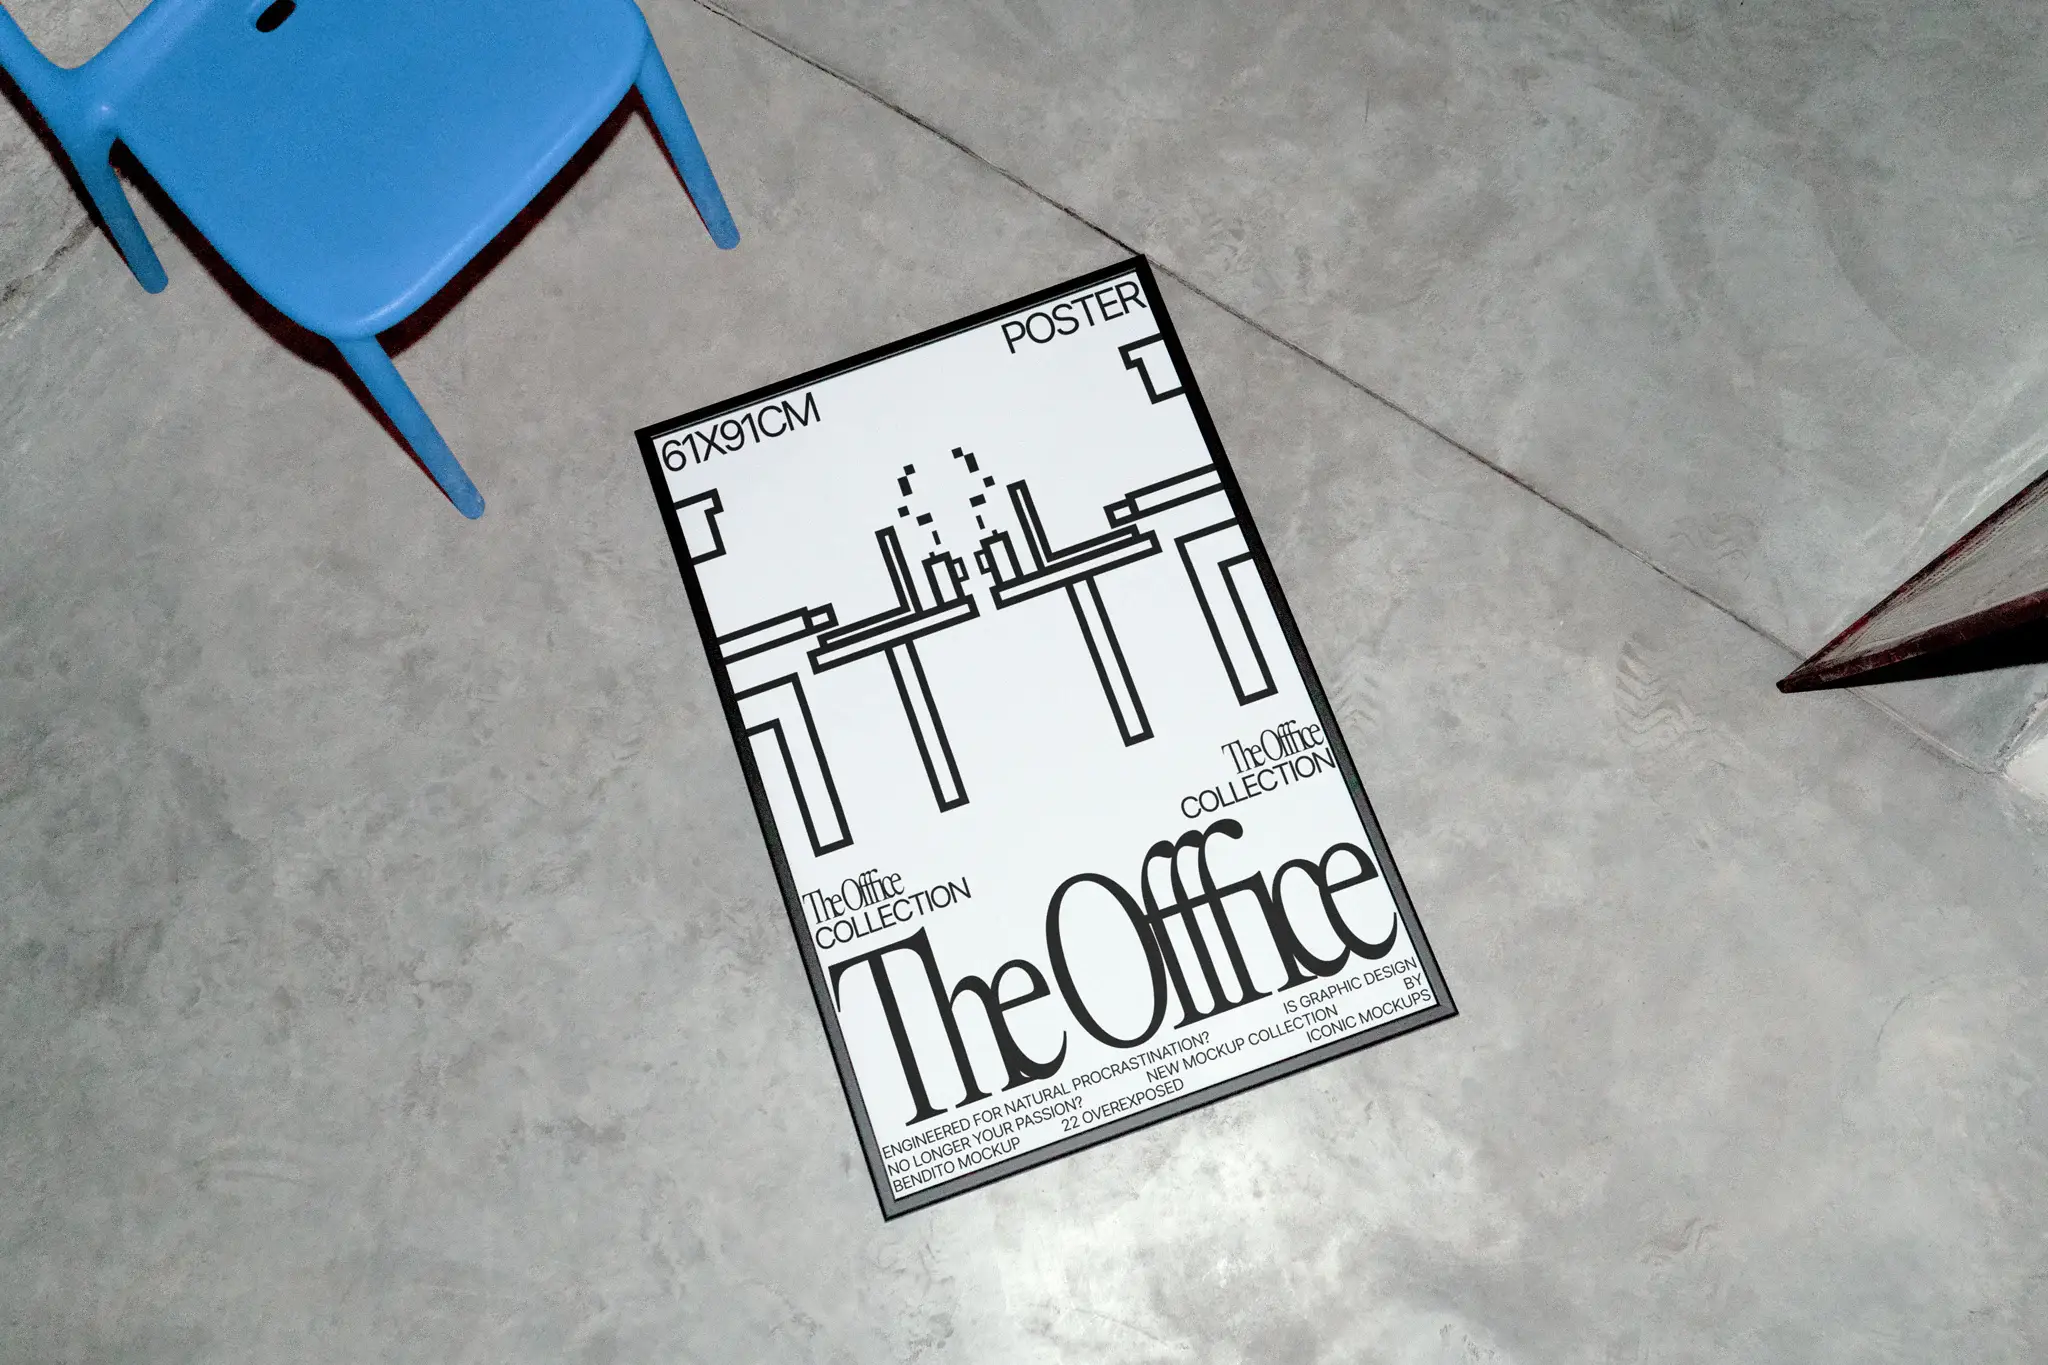 61x91cm poster mockup over a concrete floor near an blue chair